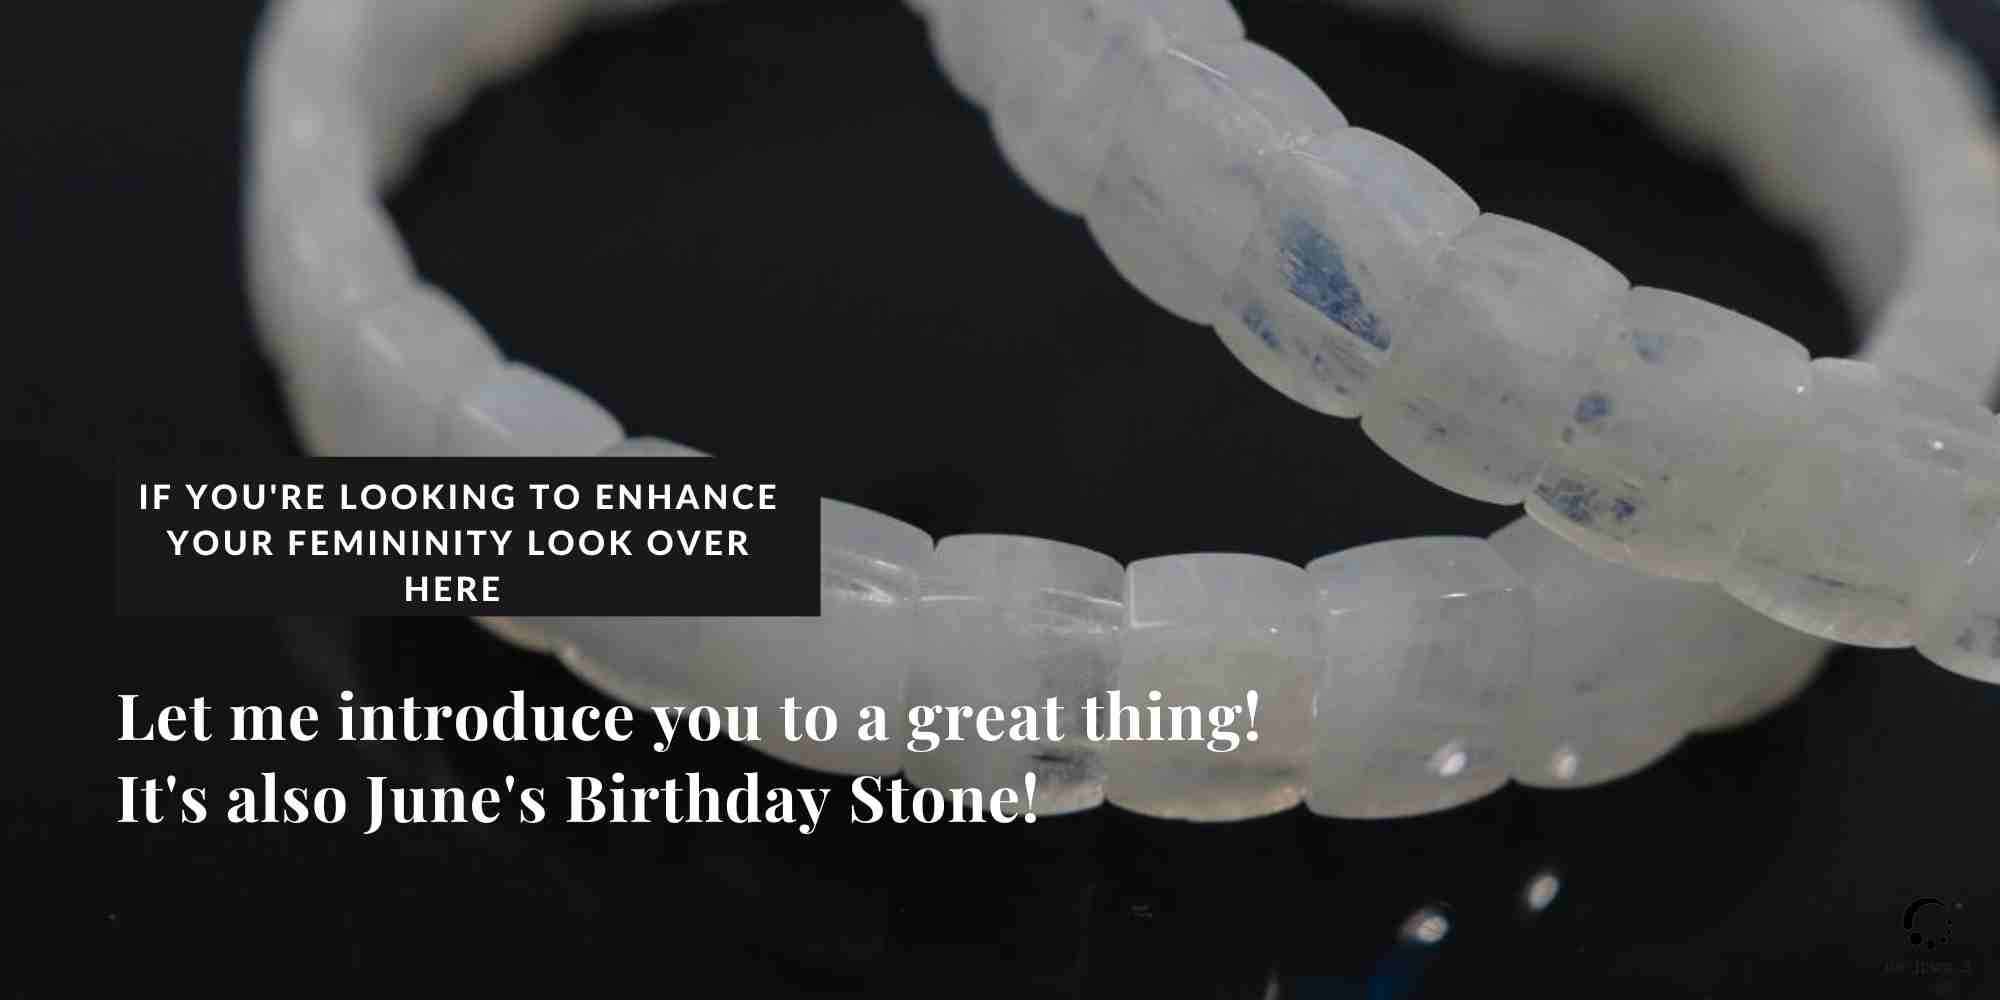 If you’re looking to enhance your femininity look over here and let me introduce you to a great thing! It’s also June’s Birthday Stone!